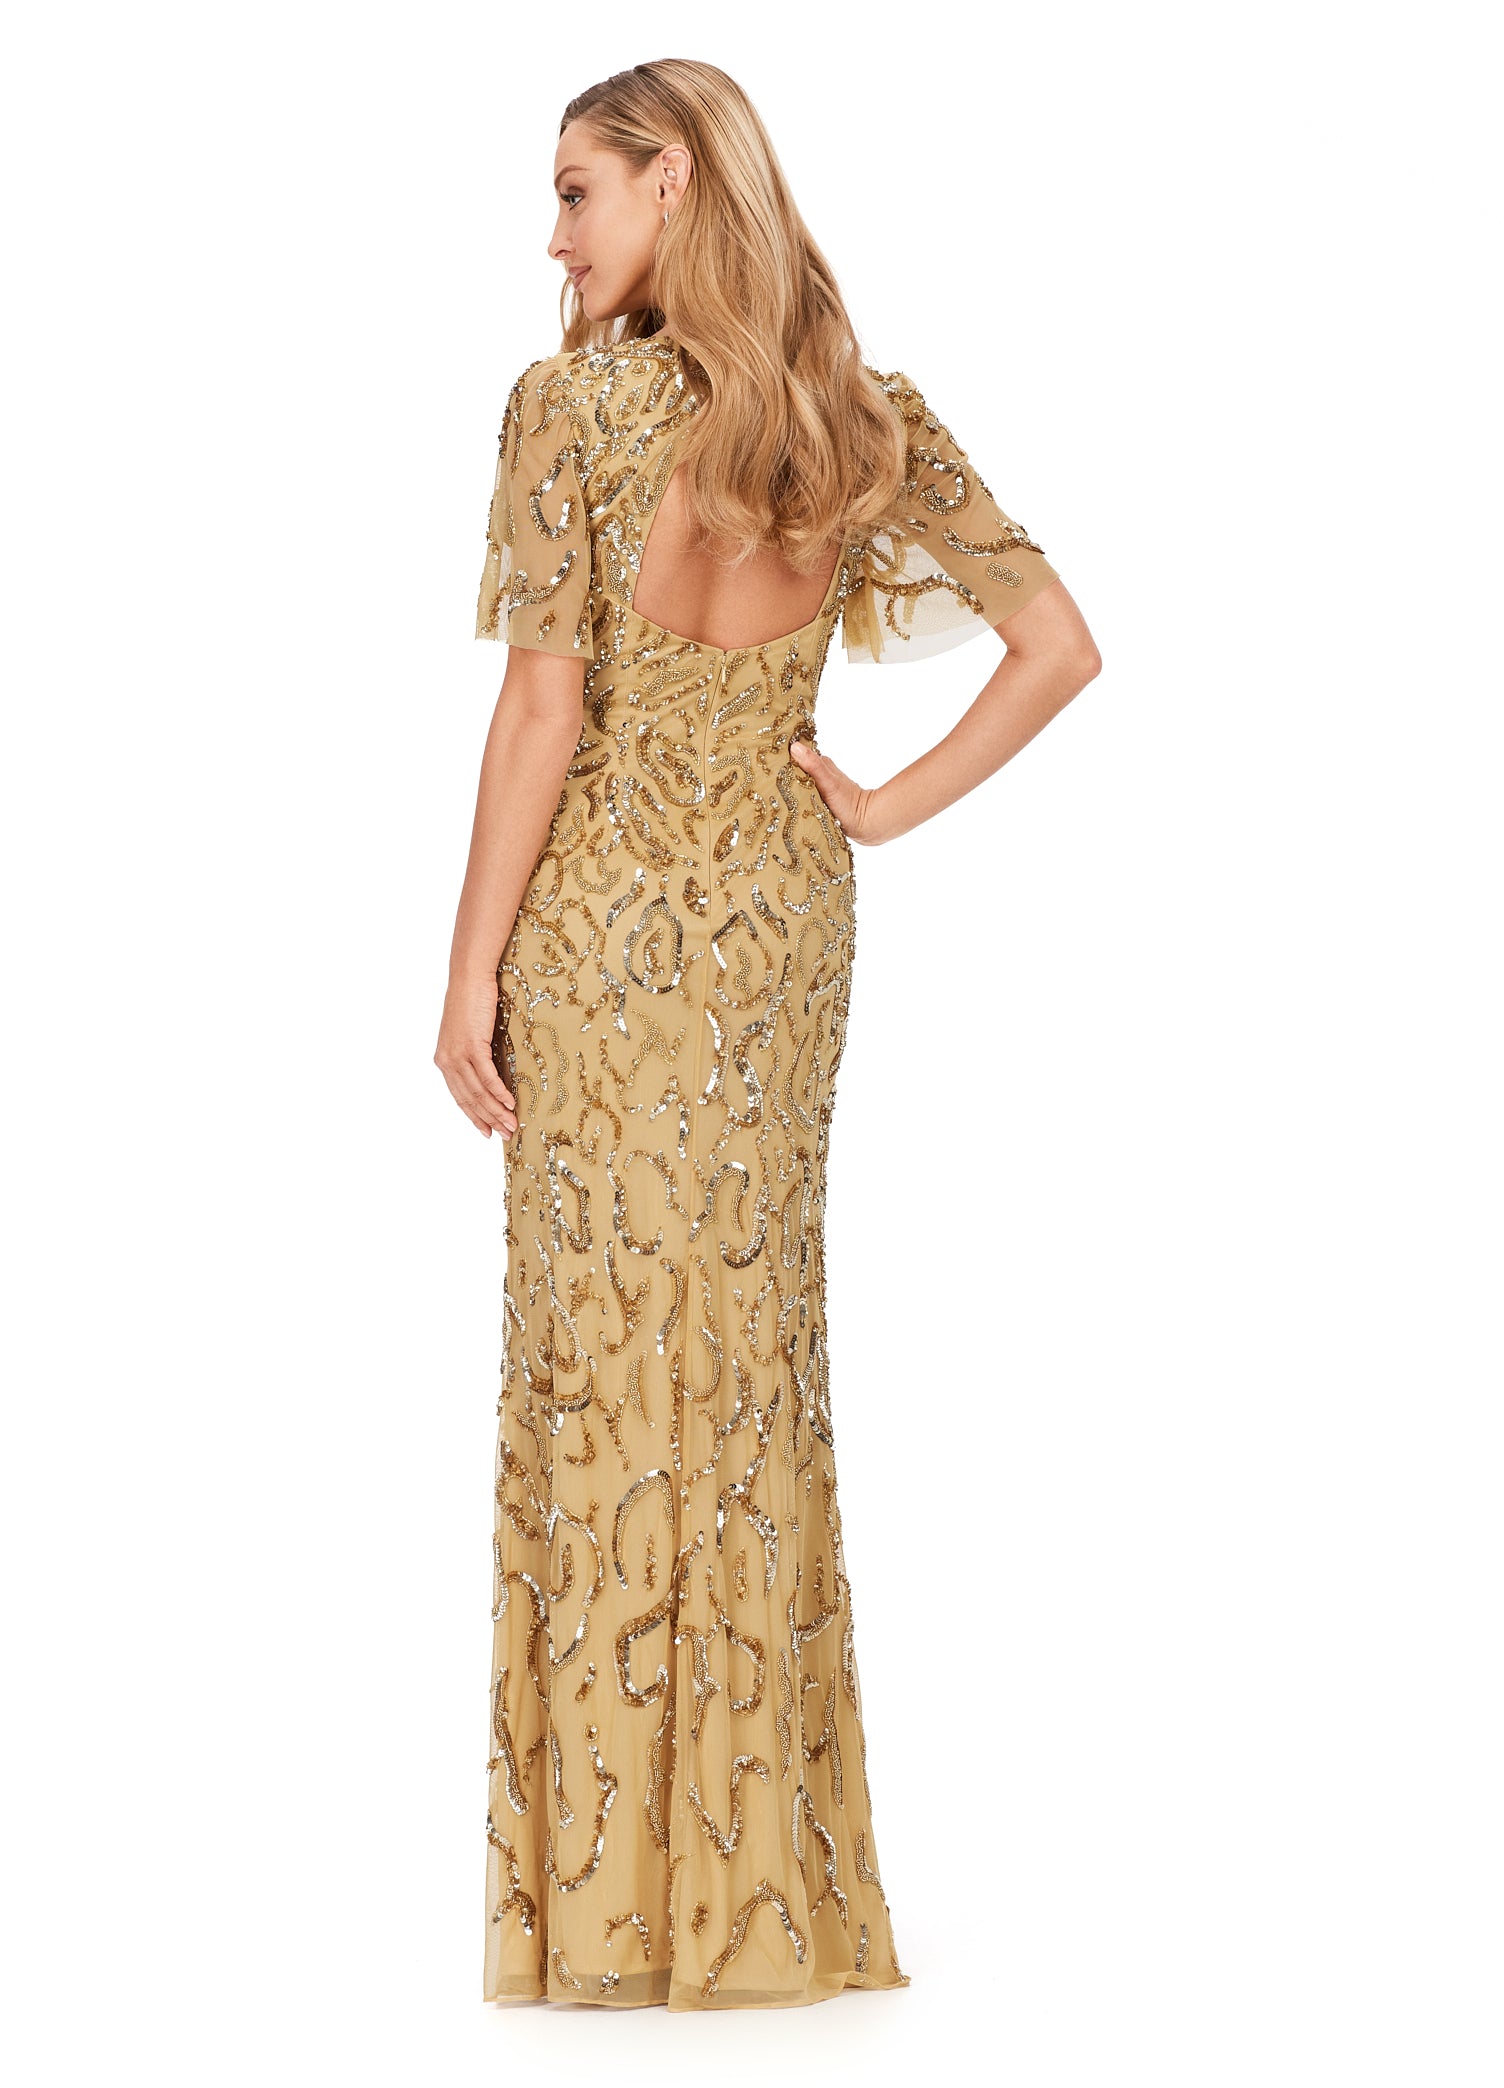 Ashley Lauren 11216 Butterfly Sleeve Fully Beaded Crew Neckline Keyhole Back Evening Dress. Dazzle at your next event in this elegant gown featuring butterfly sleeves, a keyhole back and sequin beading throughout.